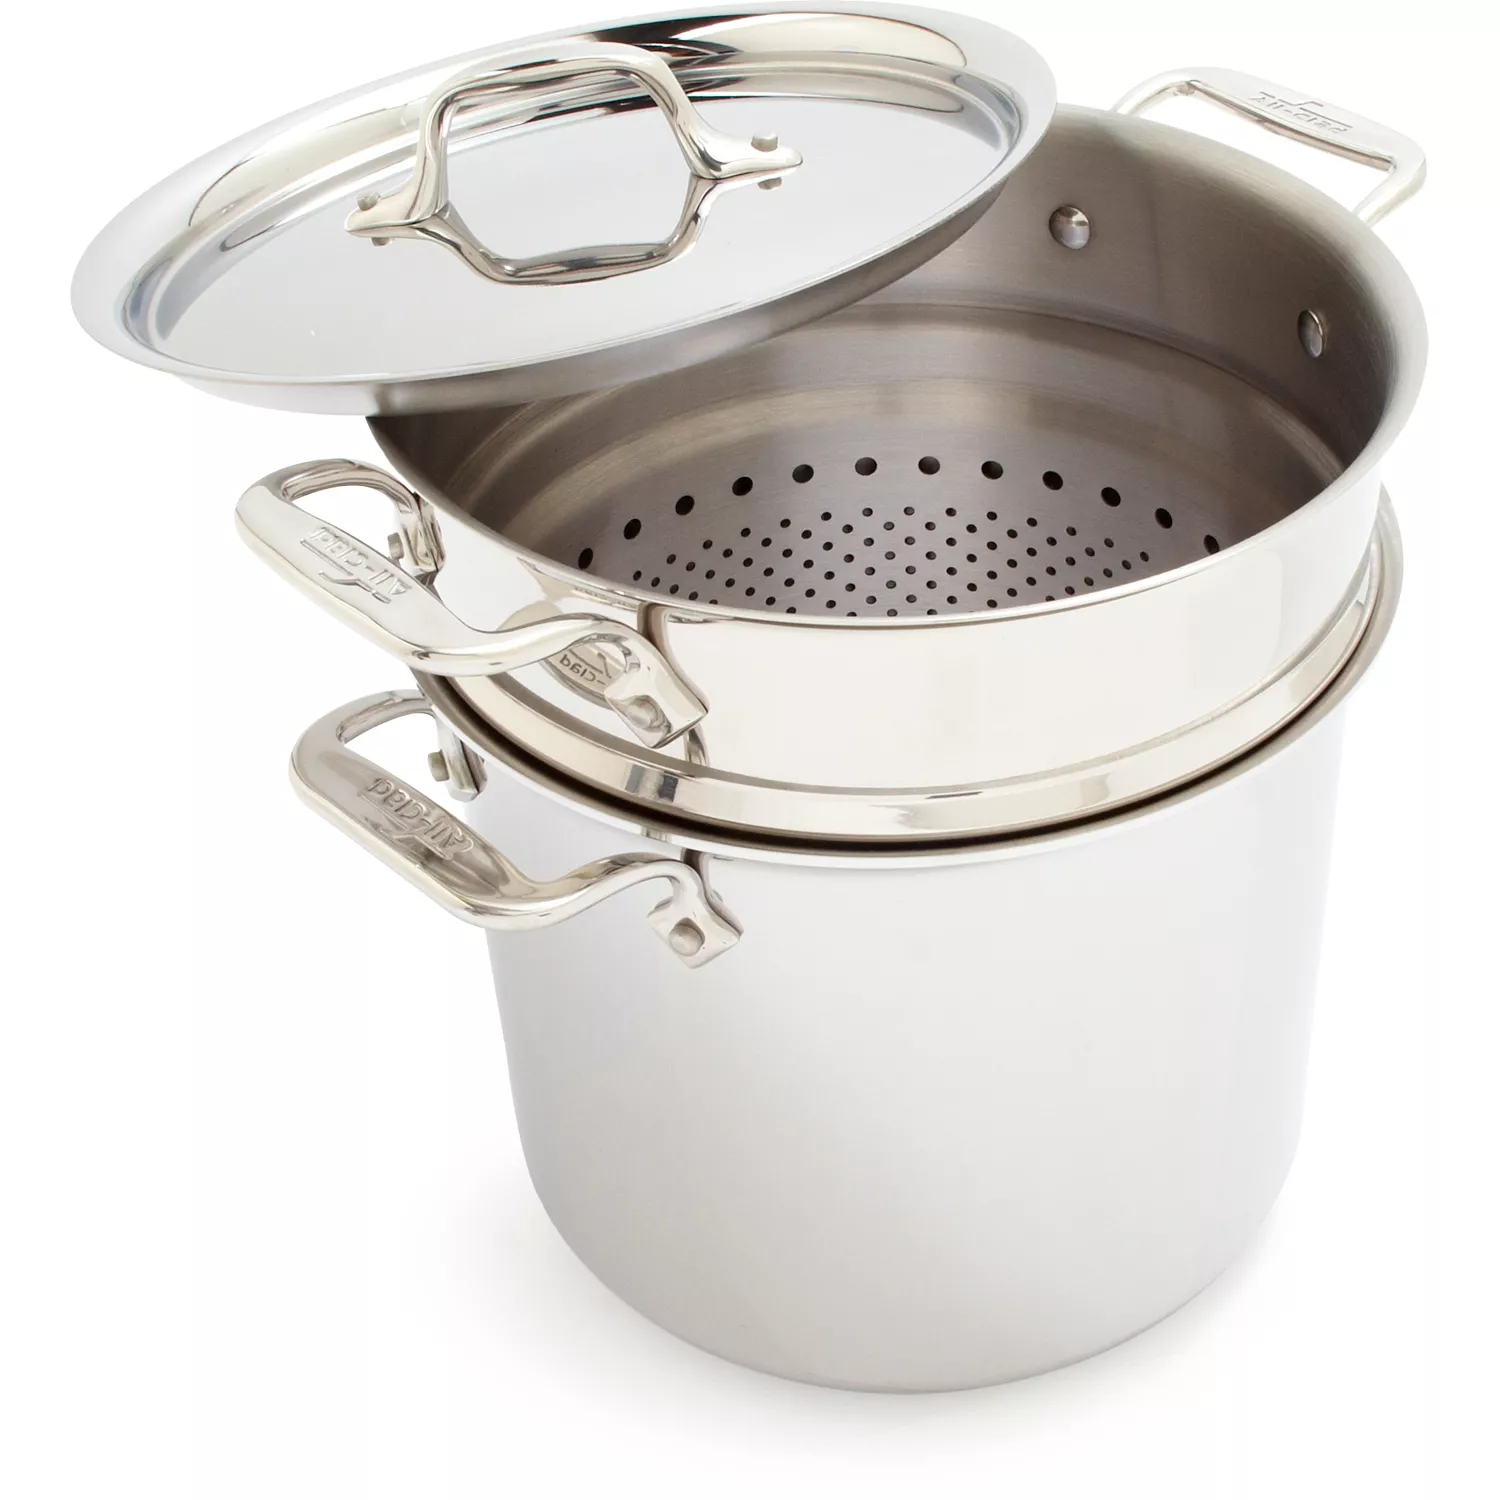 All-Clad d3 Stainless Steel Pasta Pentola, 7 qt.